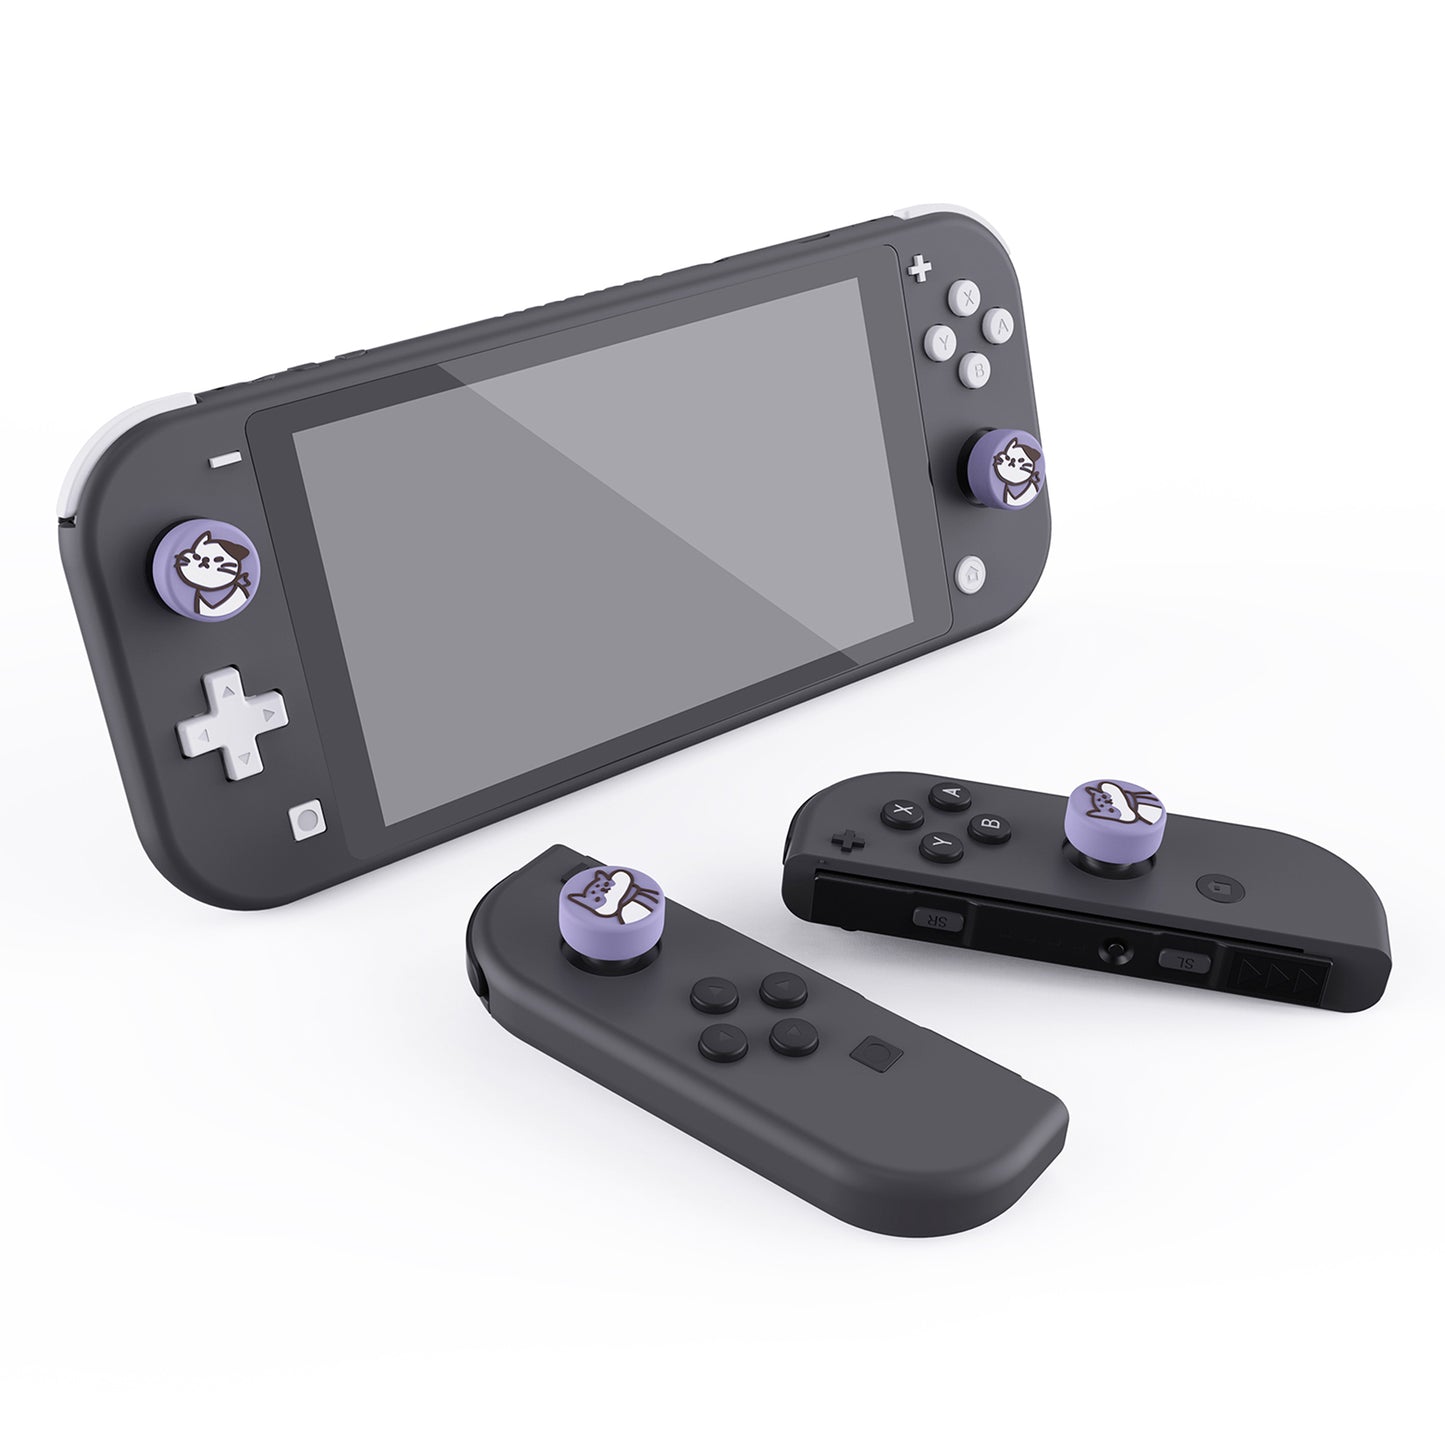 PlayVital Kitten & Doggie Cute Switch Thumb Grip Caps, Joystick Caps for Nintendo Switch Lite, Silicone Analog Cover Thumbstick Grips for Switch OLED Joycon - Light Violet - NJM1113 playvital